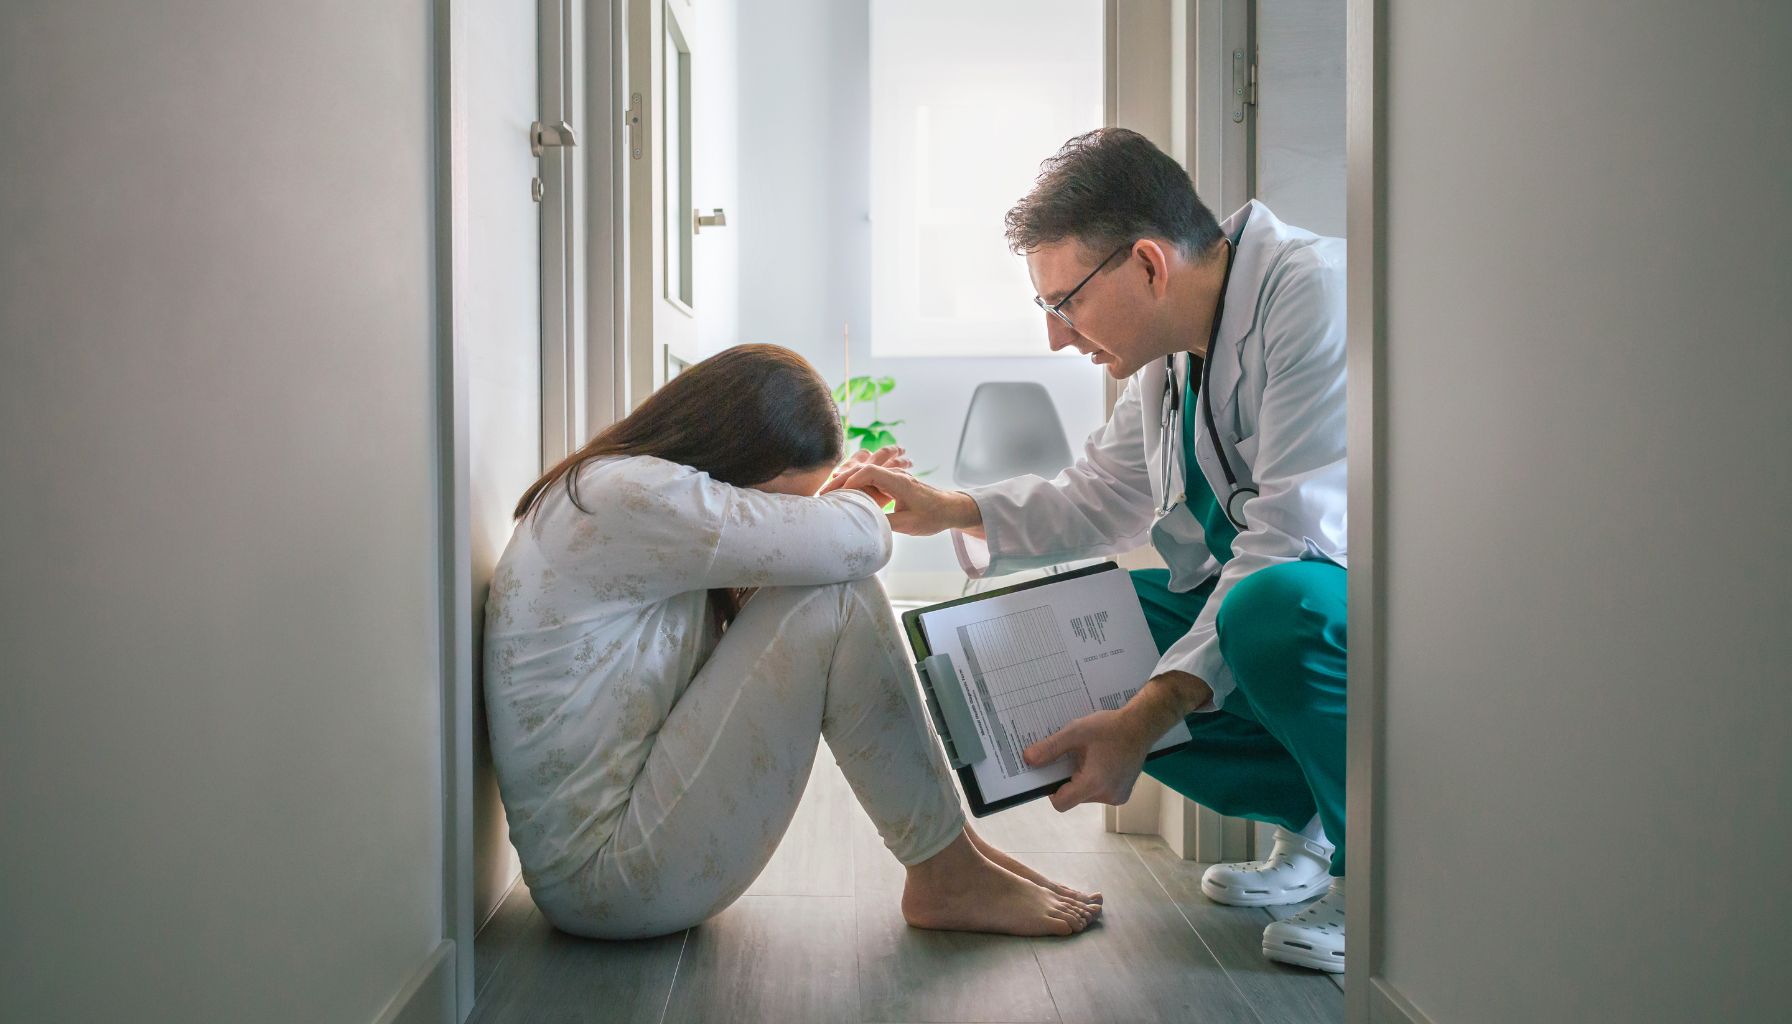 A doctor comforts a seated person in a hallway. The person has their head down and leans against a wall, visibly distressed, possibly worried about water damage restoration needed for their home. The doctor holds a clipboard and places a hand gently on their shoulder. -PureOneServices